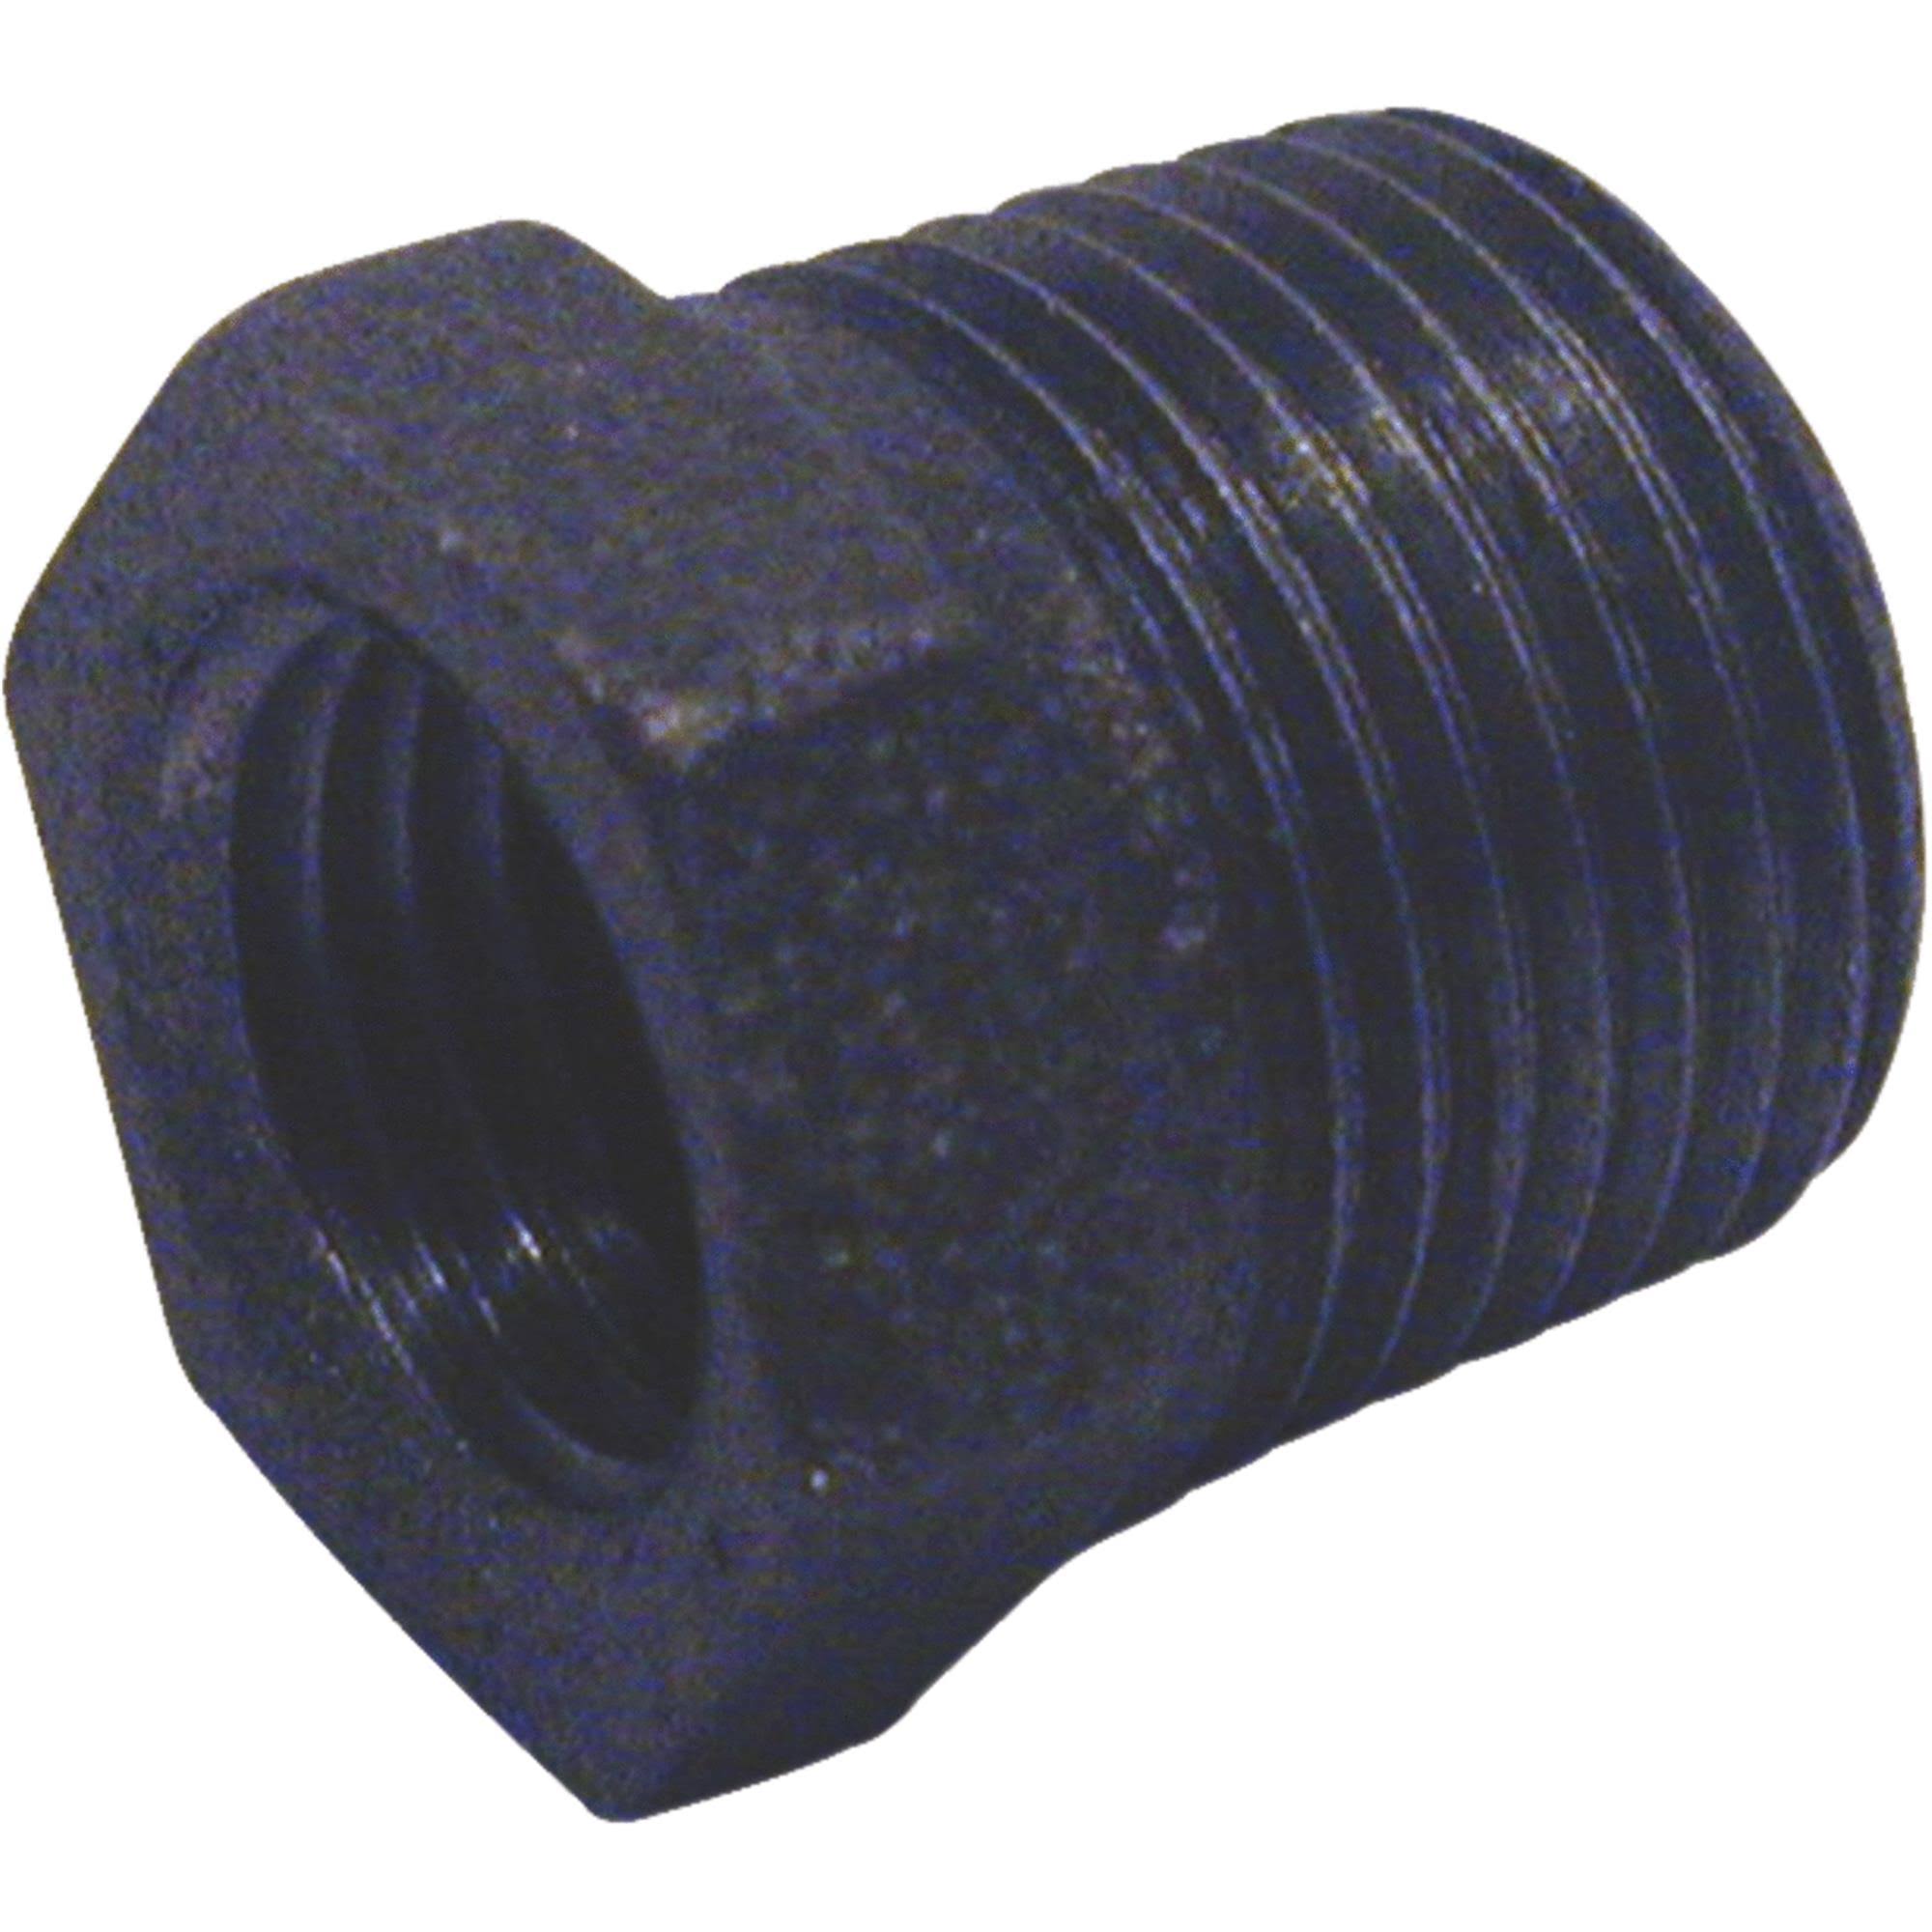 Mueller Global Malleable Iron Bushing - MPT x FPT, Black, 1-1/4" x 1/2"